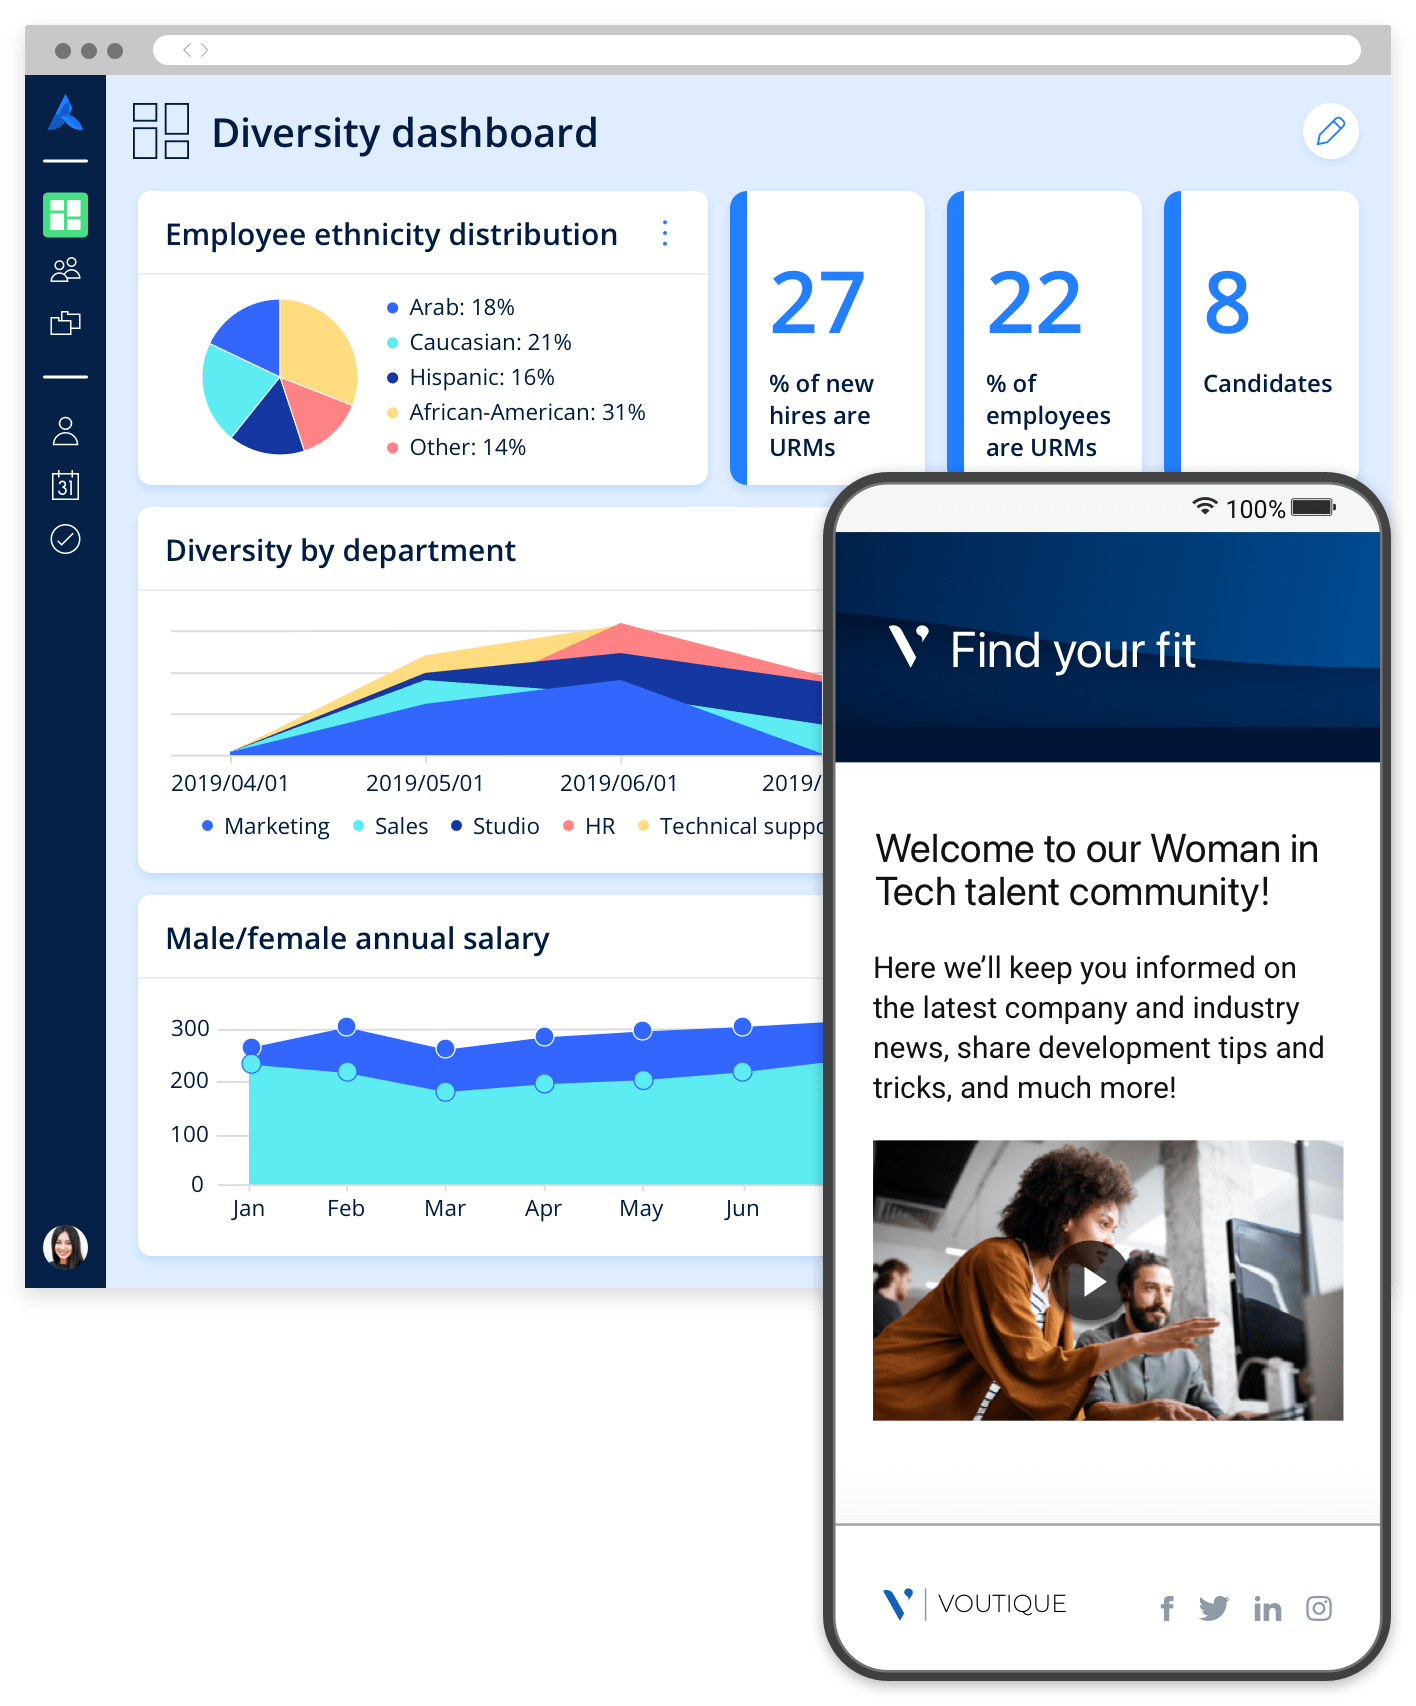 Two of Avature's diversity features: a dashboard with different graphs and metrics about inclusion, and a mobile career site for women in technology.